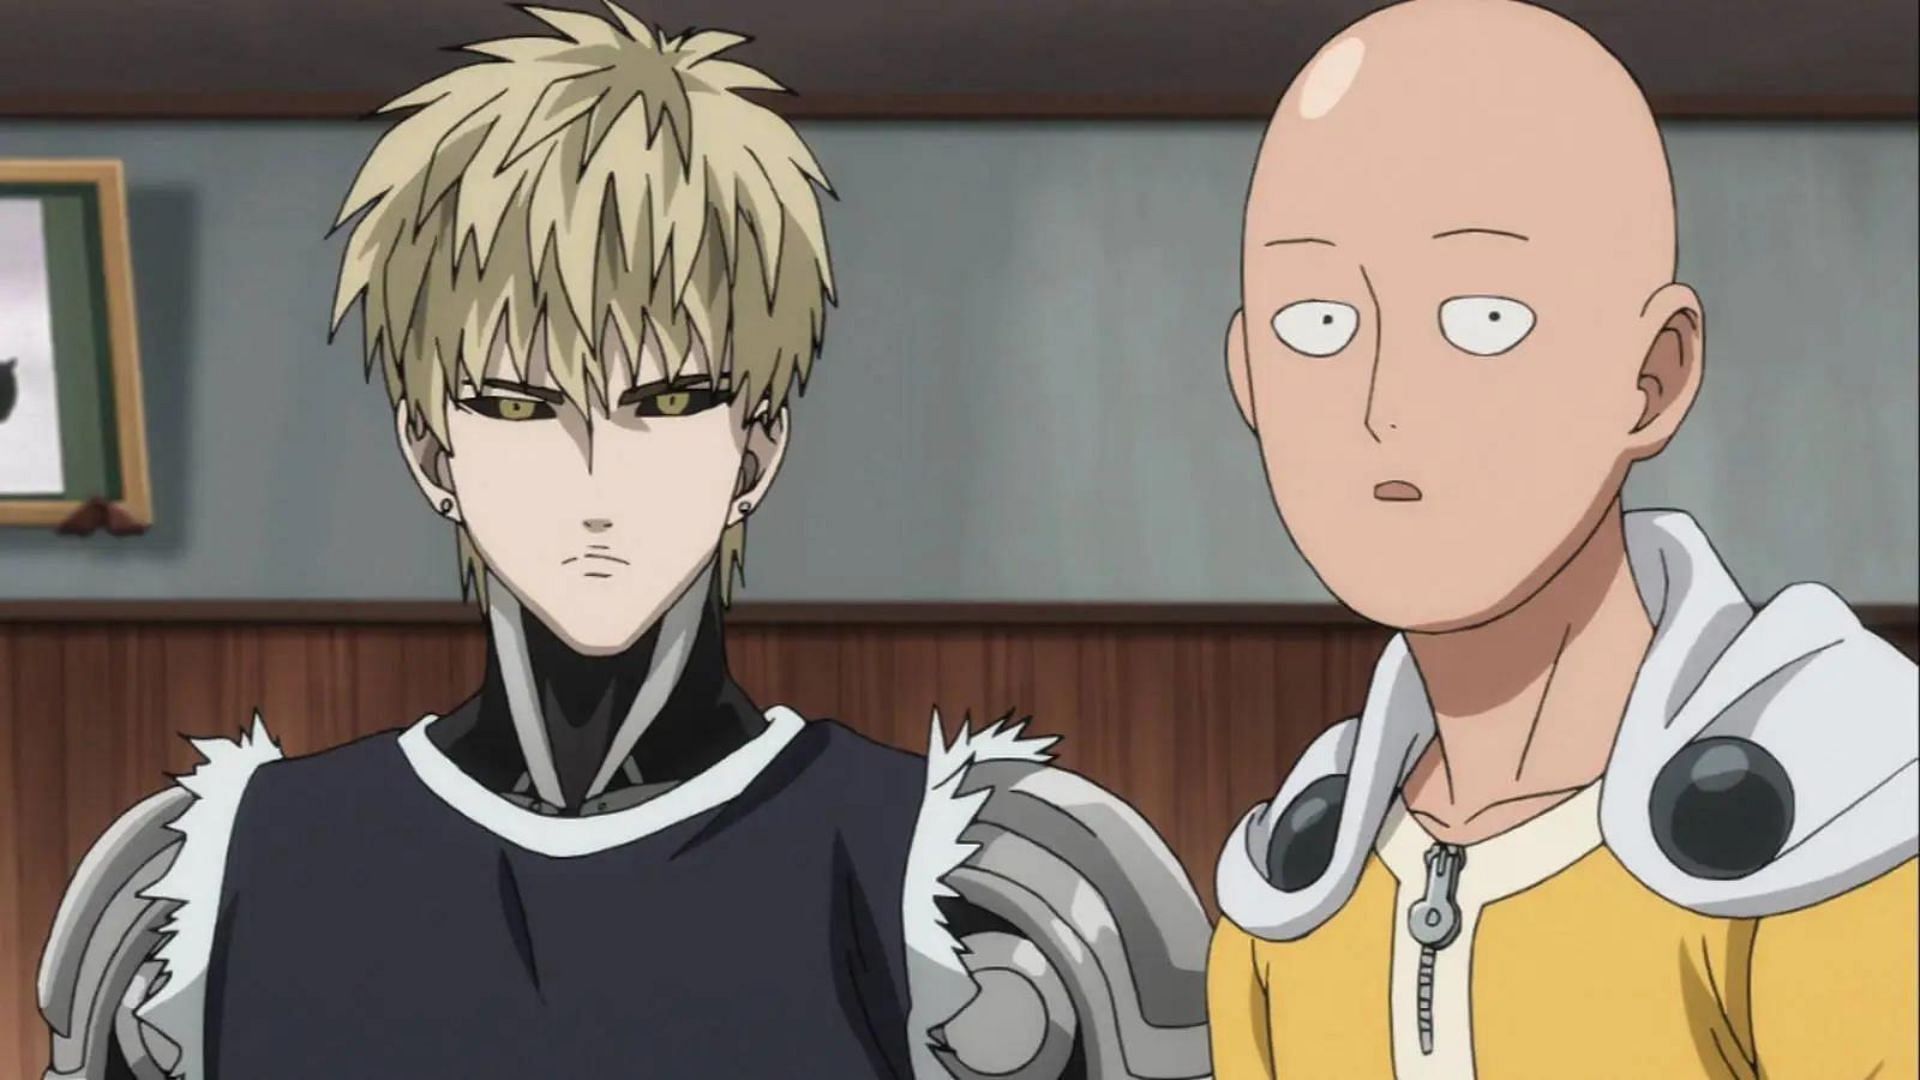 Genos and Saitama as seen in One Punch Man anime